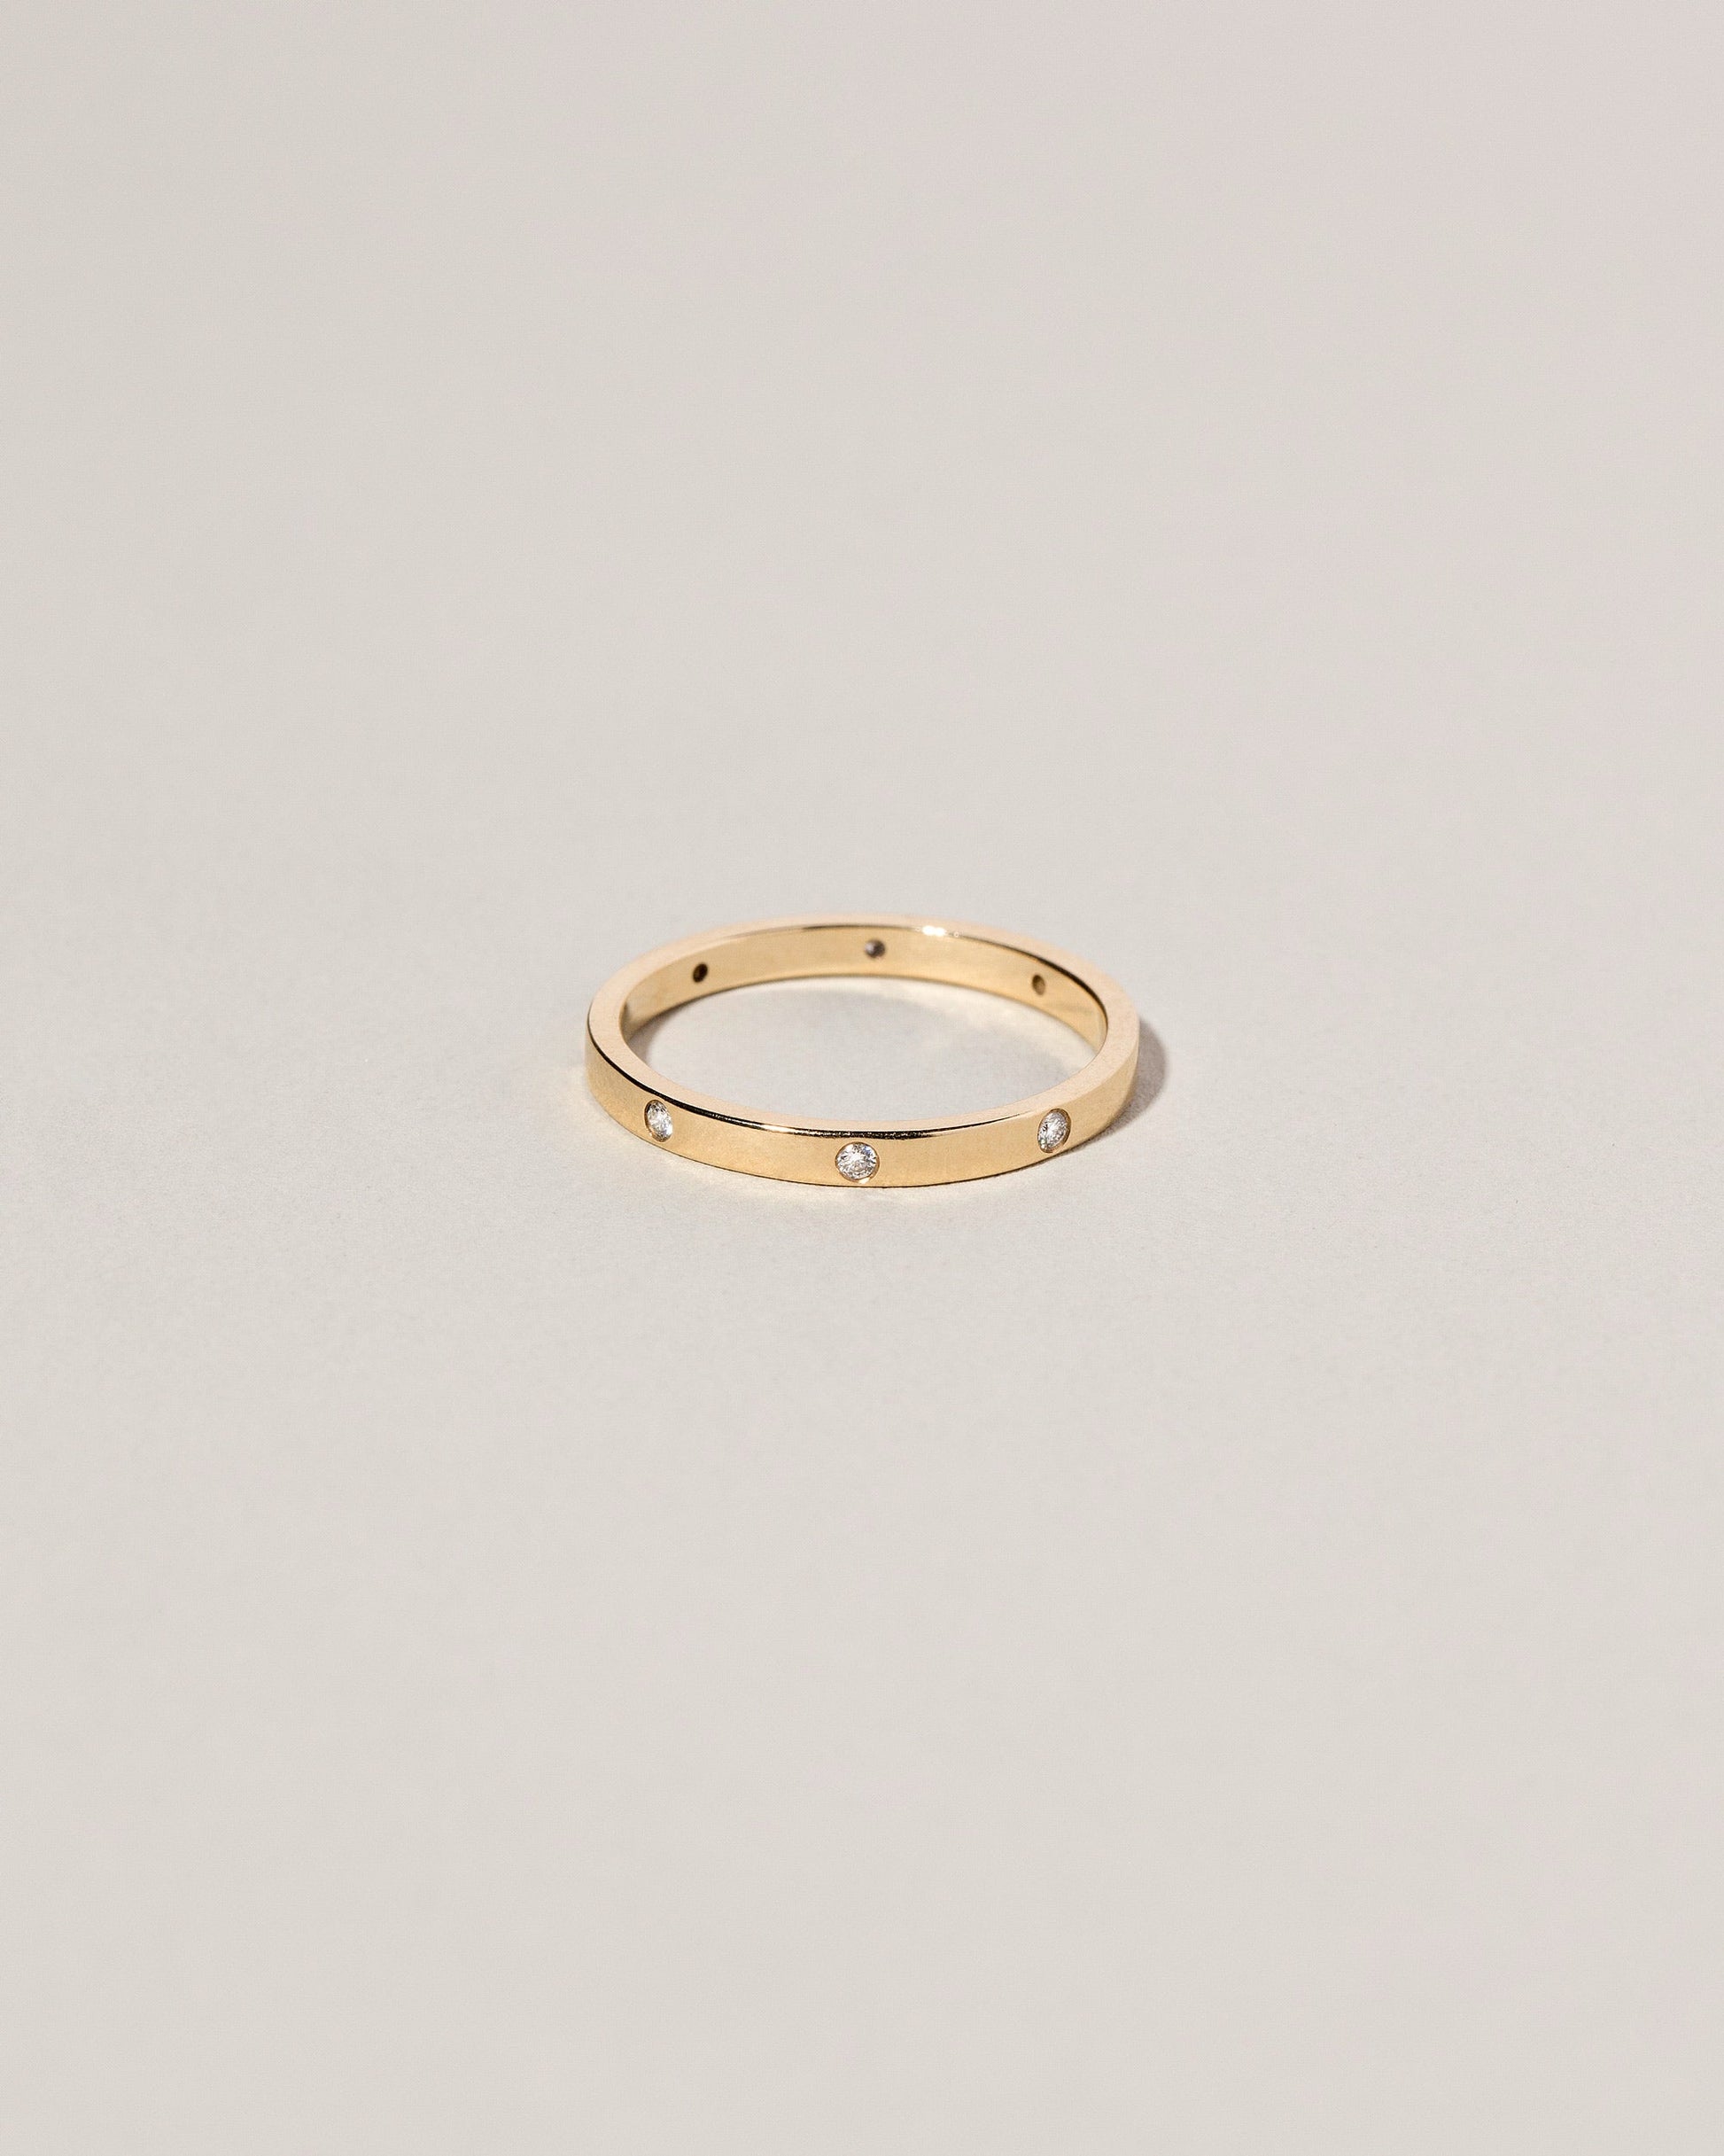 Gold 2mm Square Wire Band with Six Stone White Diamond 1.6mm added on light color background.